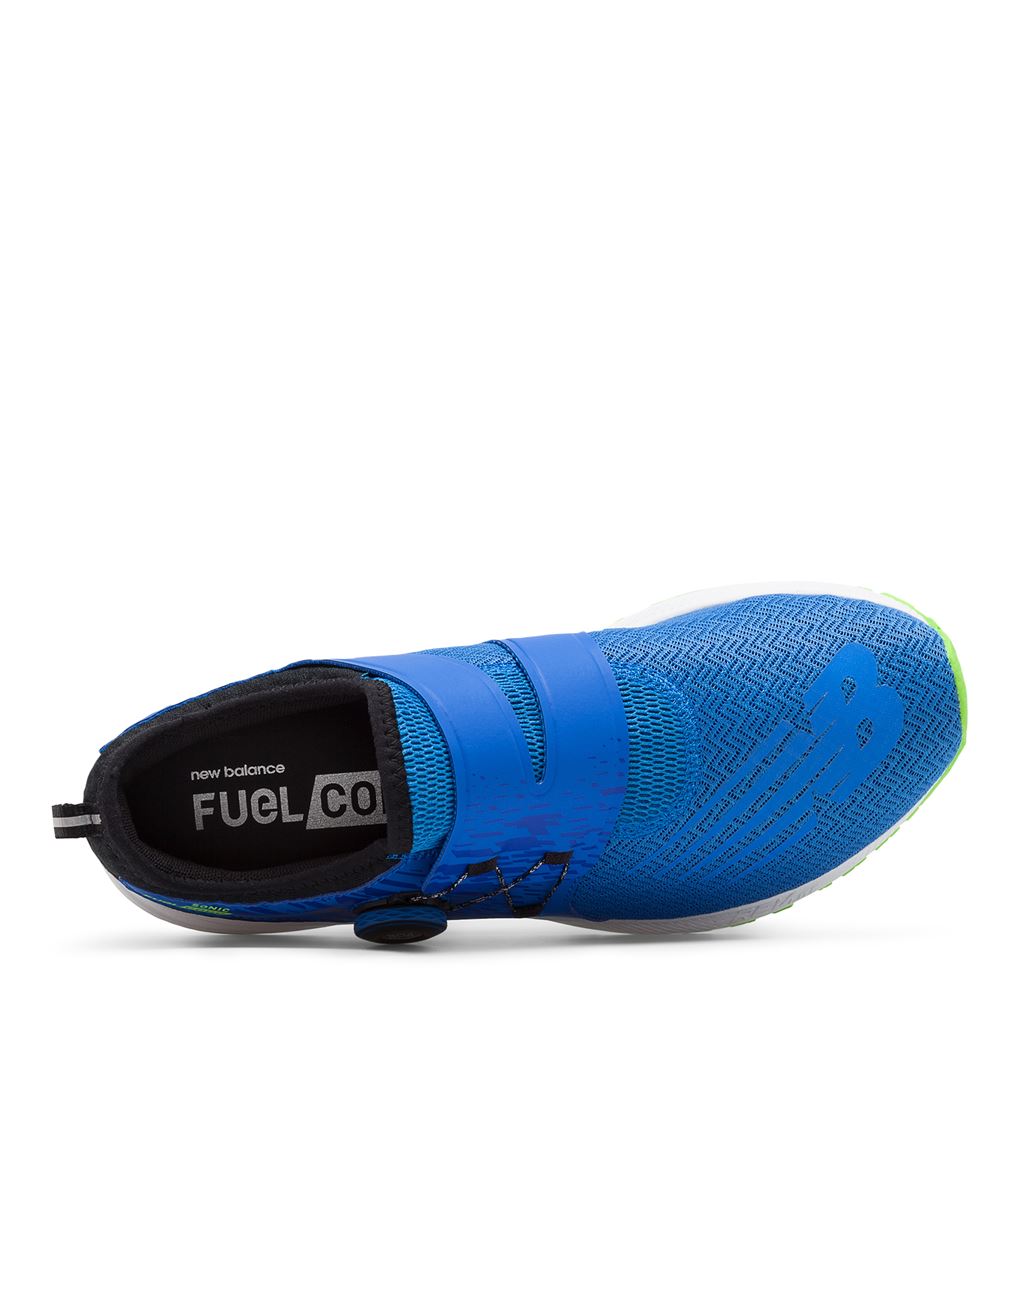 FuelCore Sonic < BF | New Balance